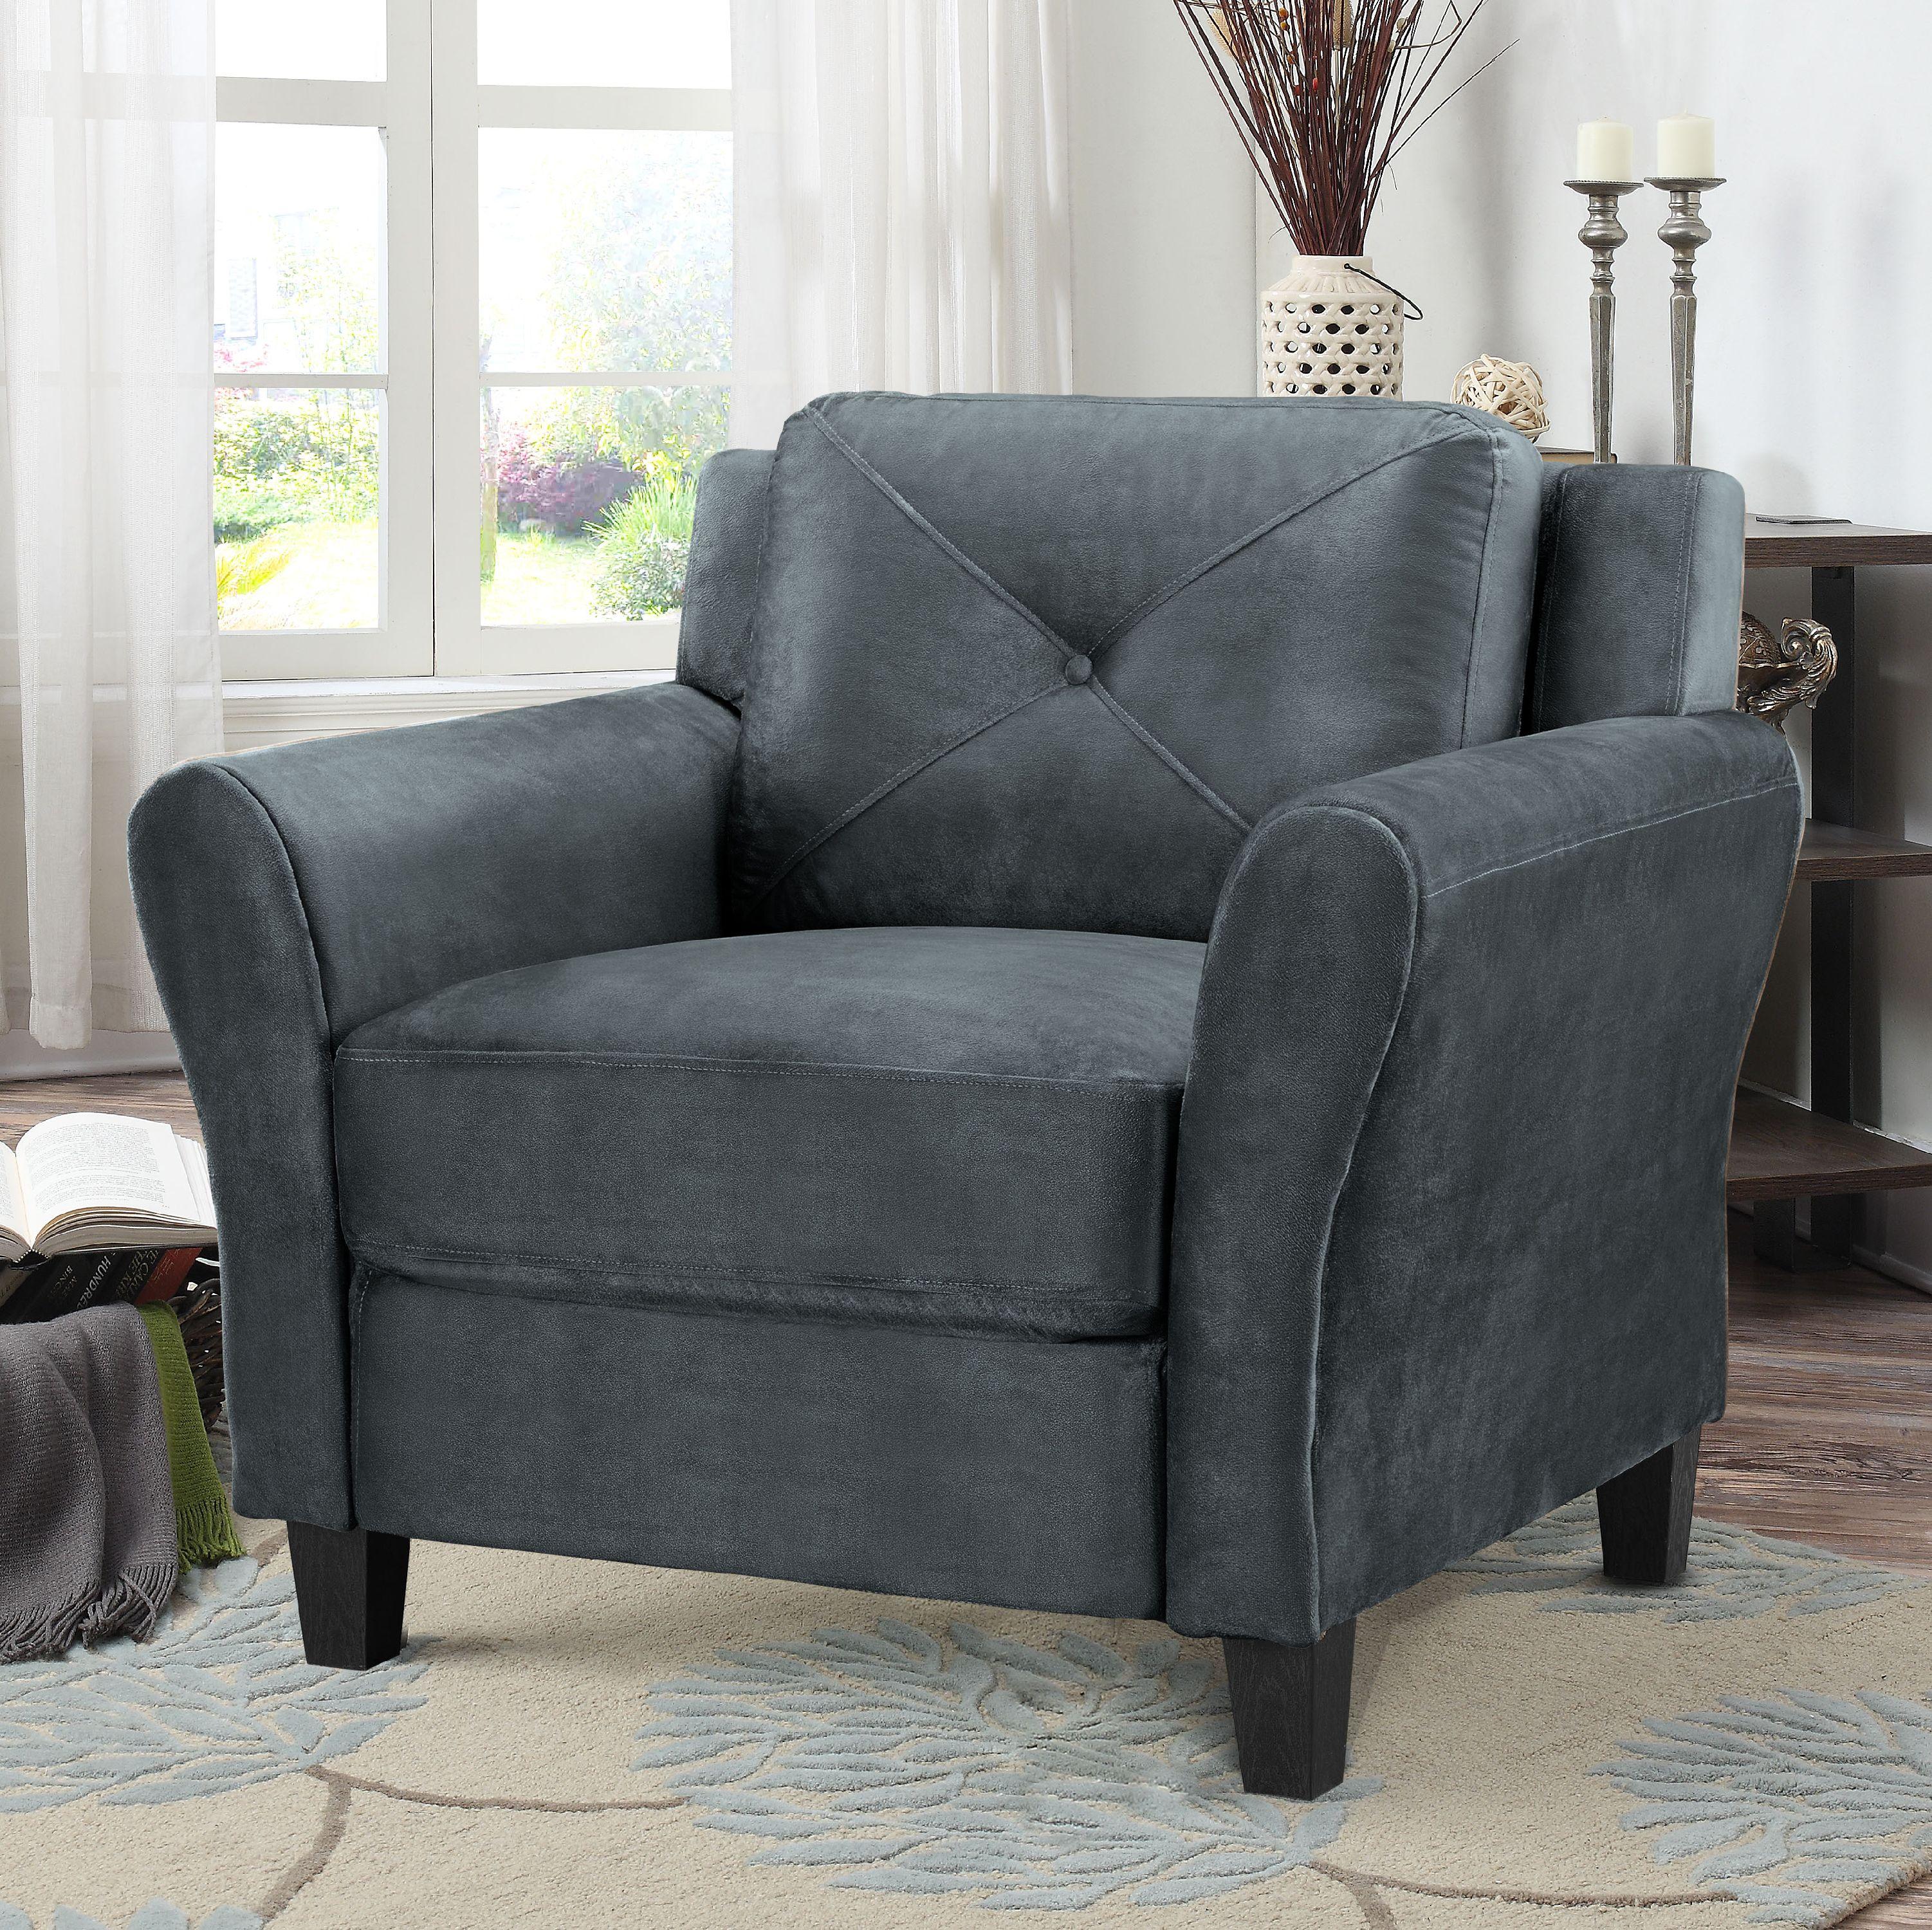 Taryn Rolled Microfiber Arm Chair for $136.80 Shipped